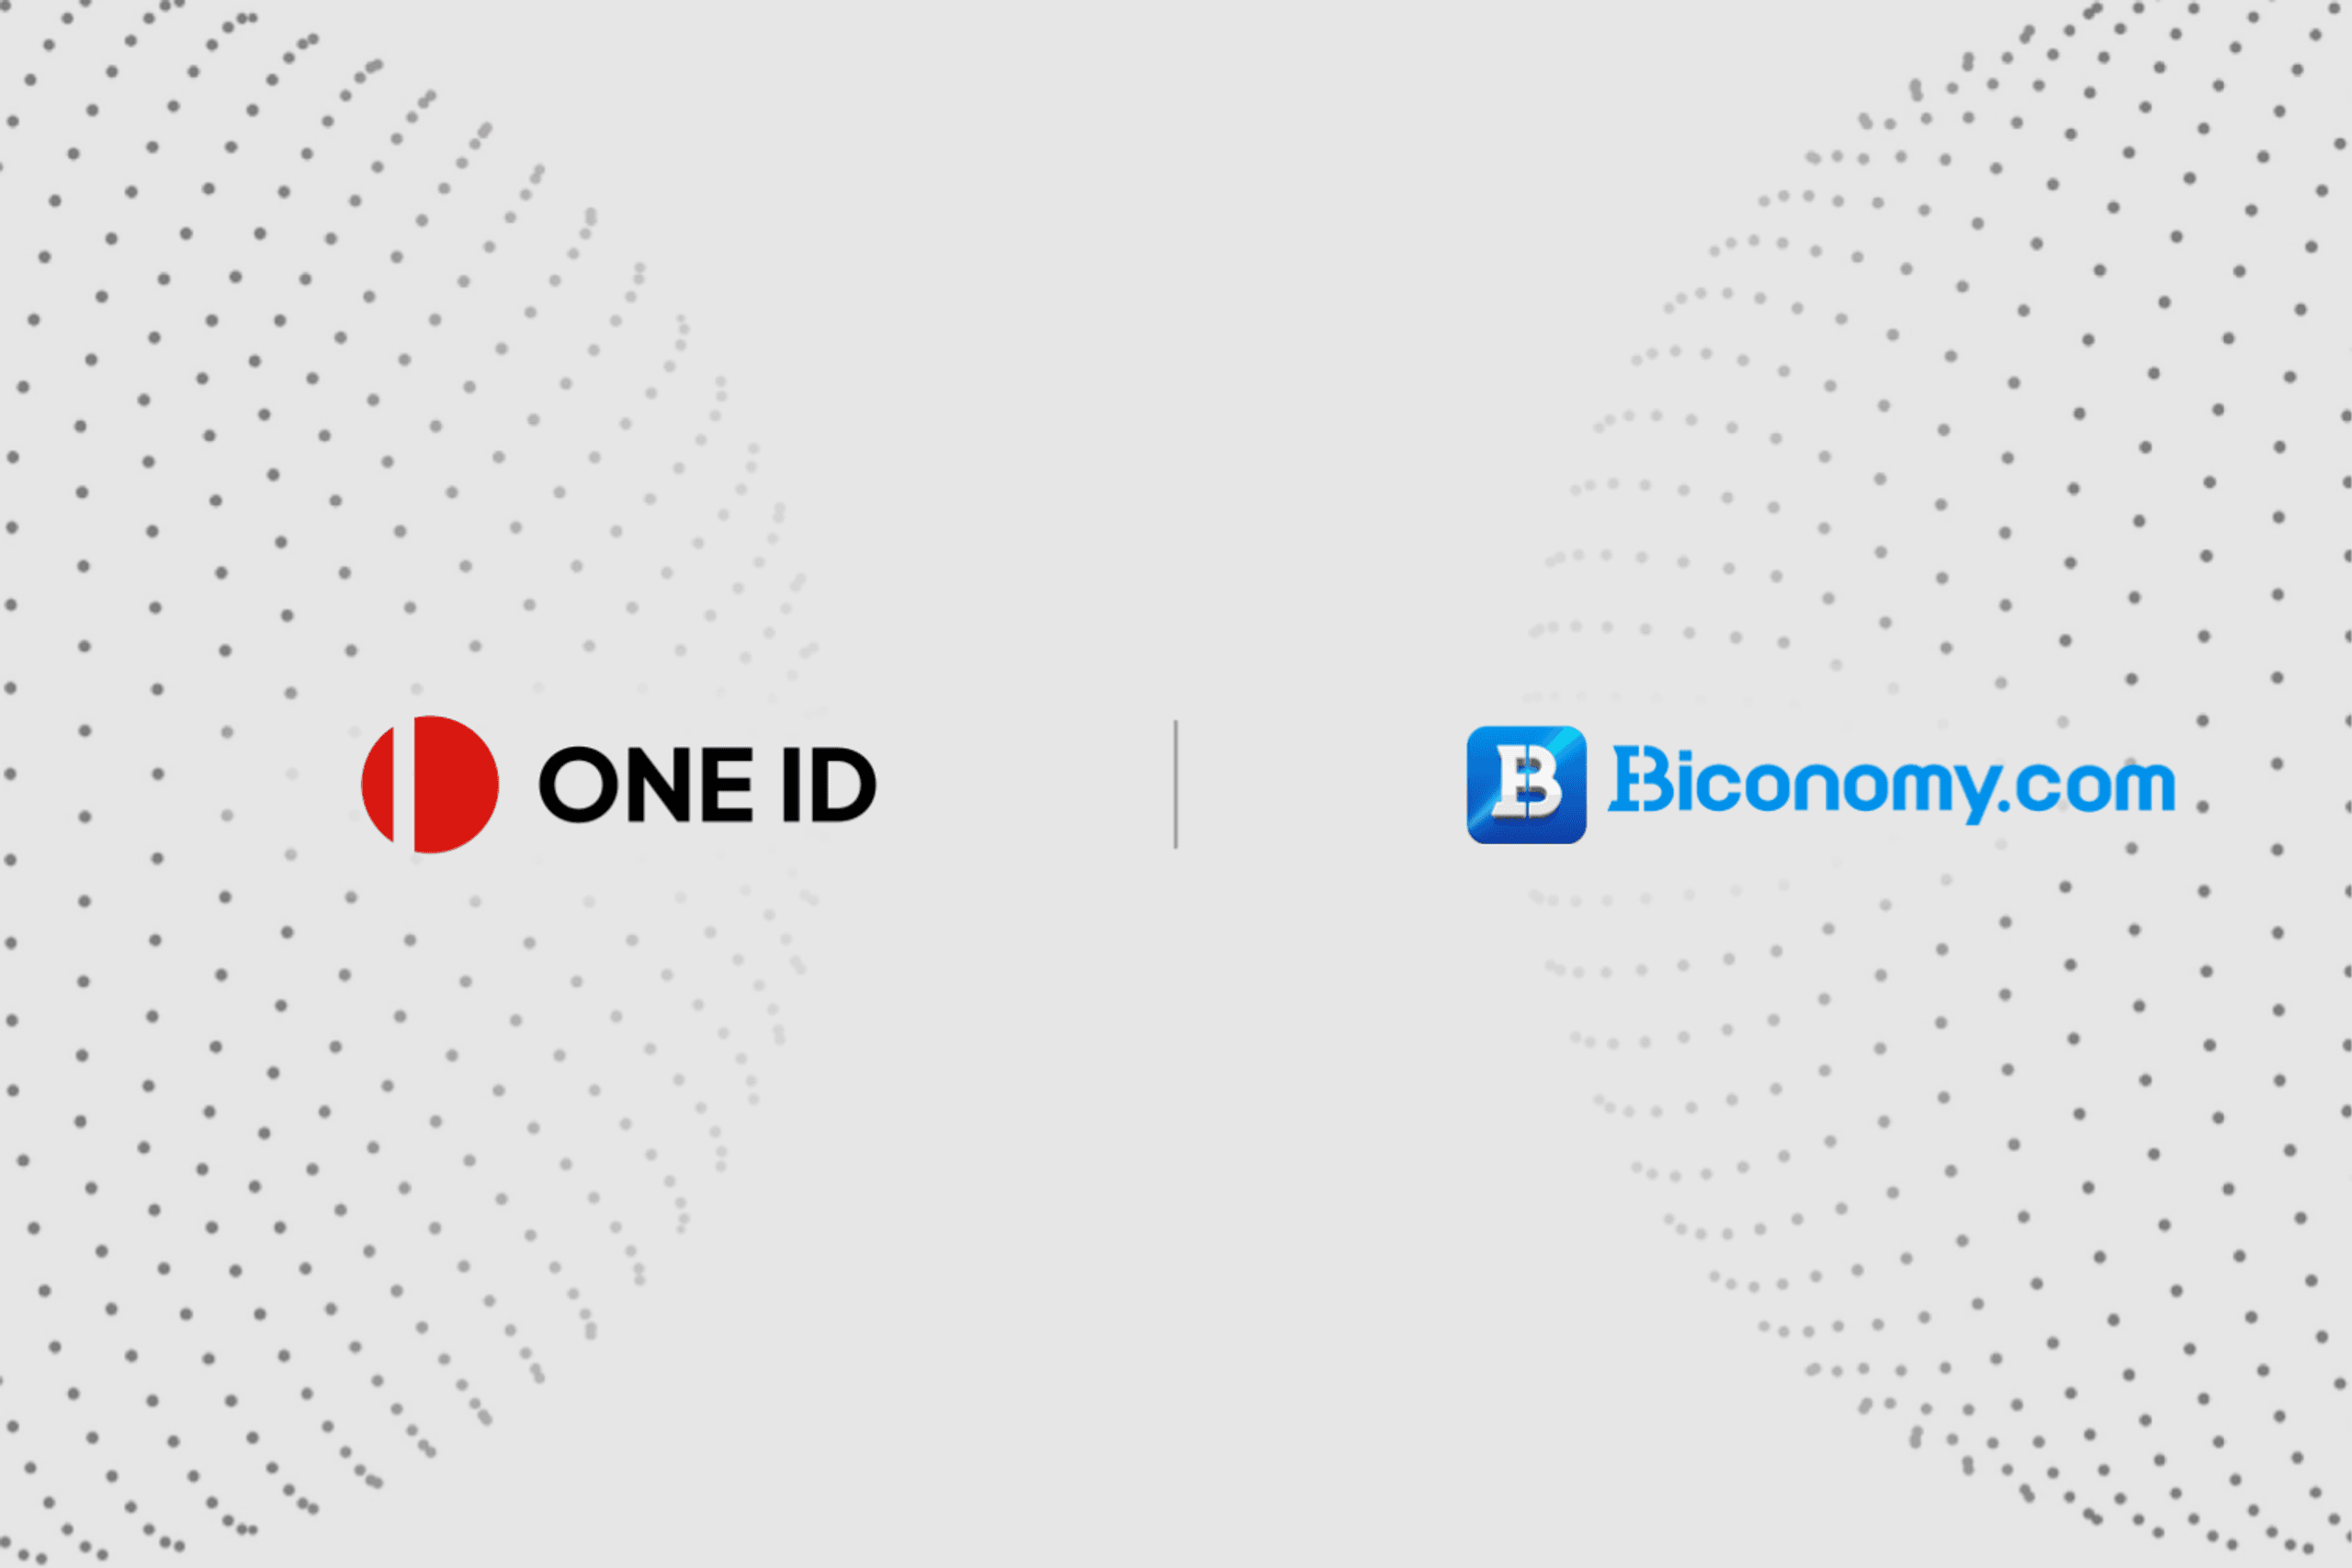 Drive Innovation In User Web3 Experience With The Collaboration Of OneID And Biconomy